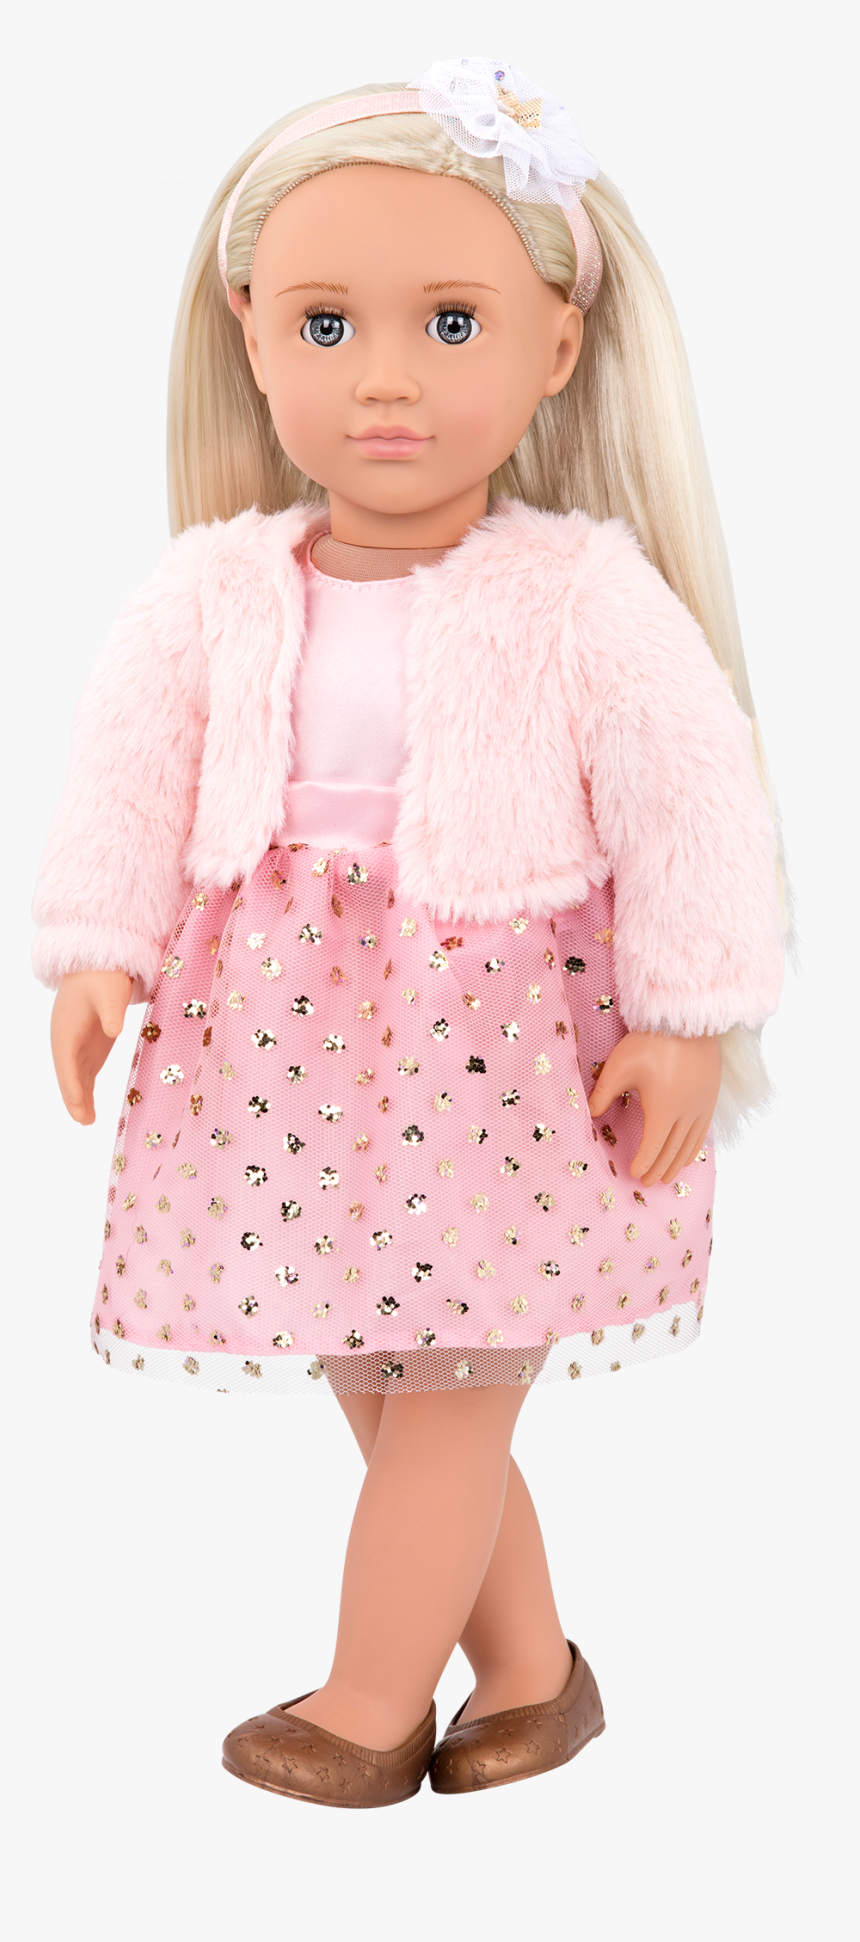 Millie Regular 18-inch Doll With Legs Crossed - Generation Doll Milly